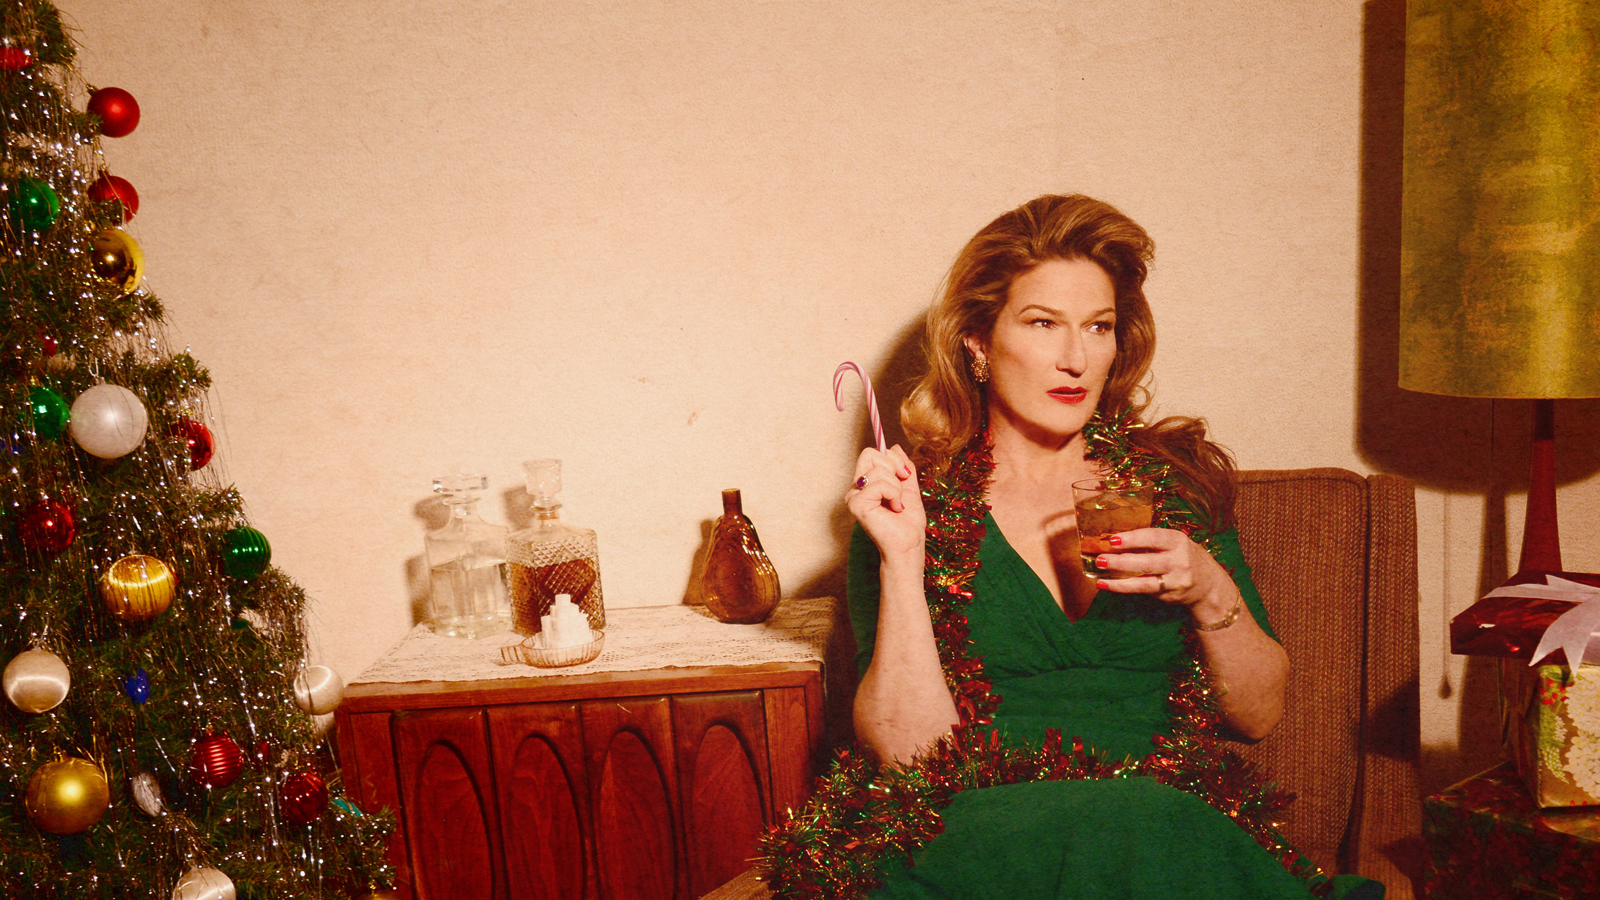 A woman in a green dress with a drink and a cigarette looking off to her left. There is a table with a red and white tablecloth, and the image gives off a holiday vibe.